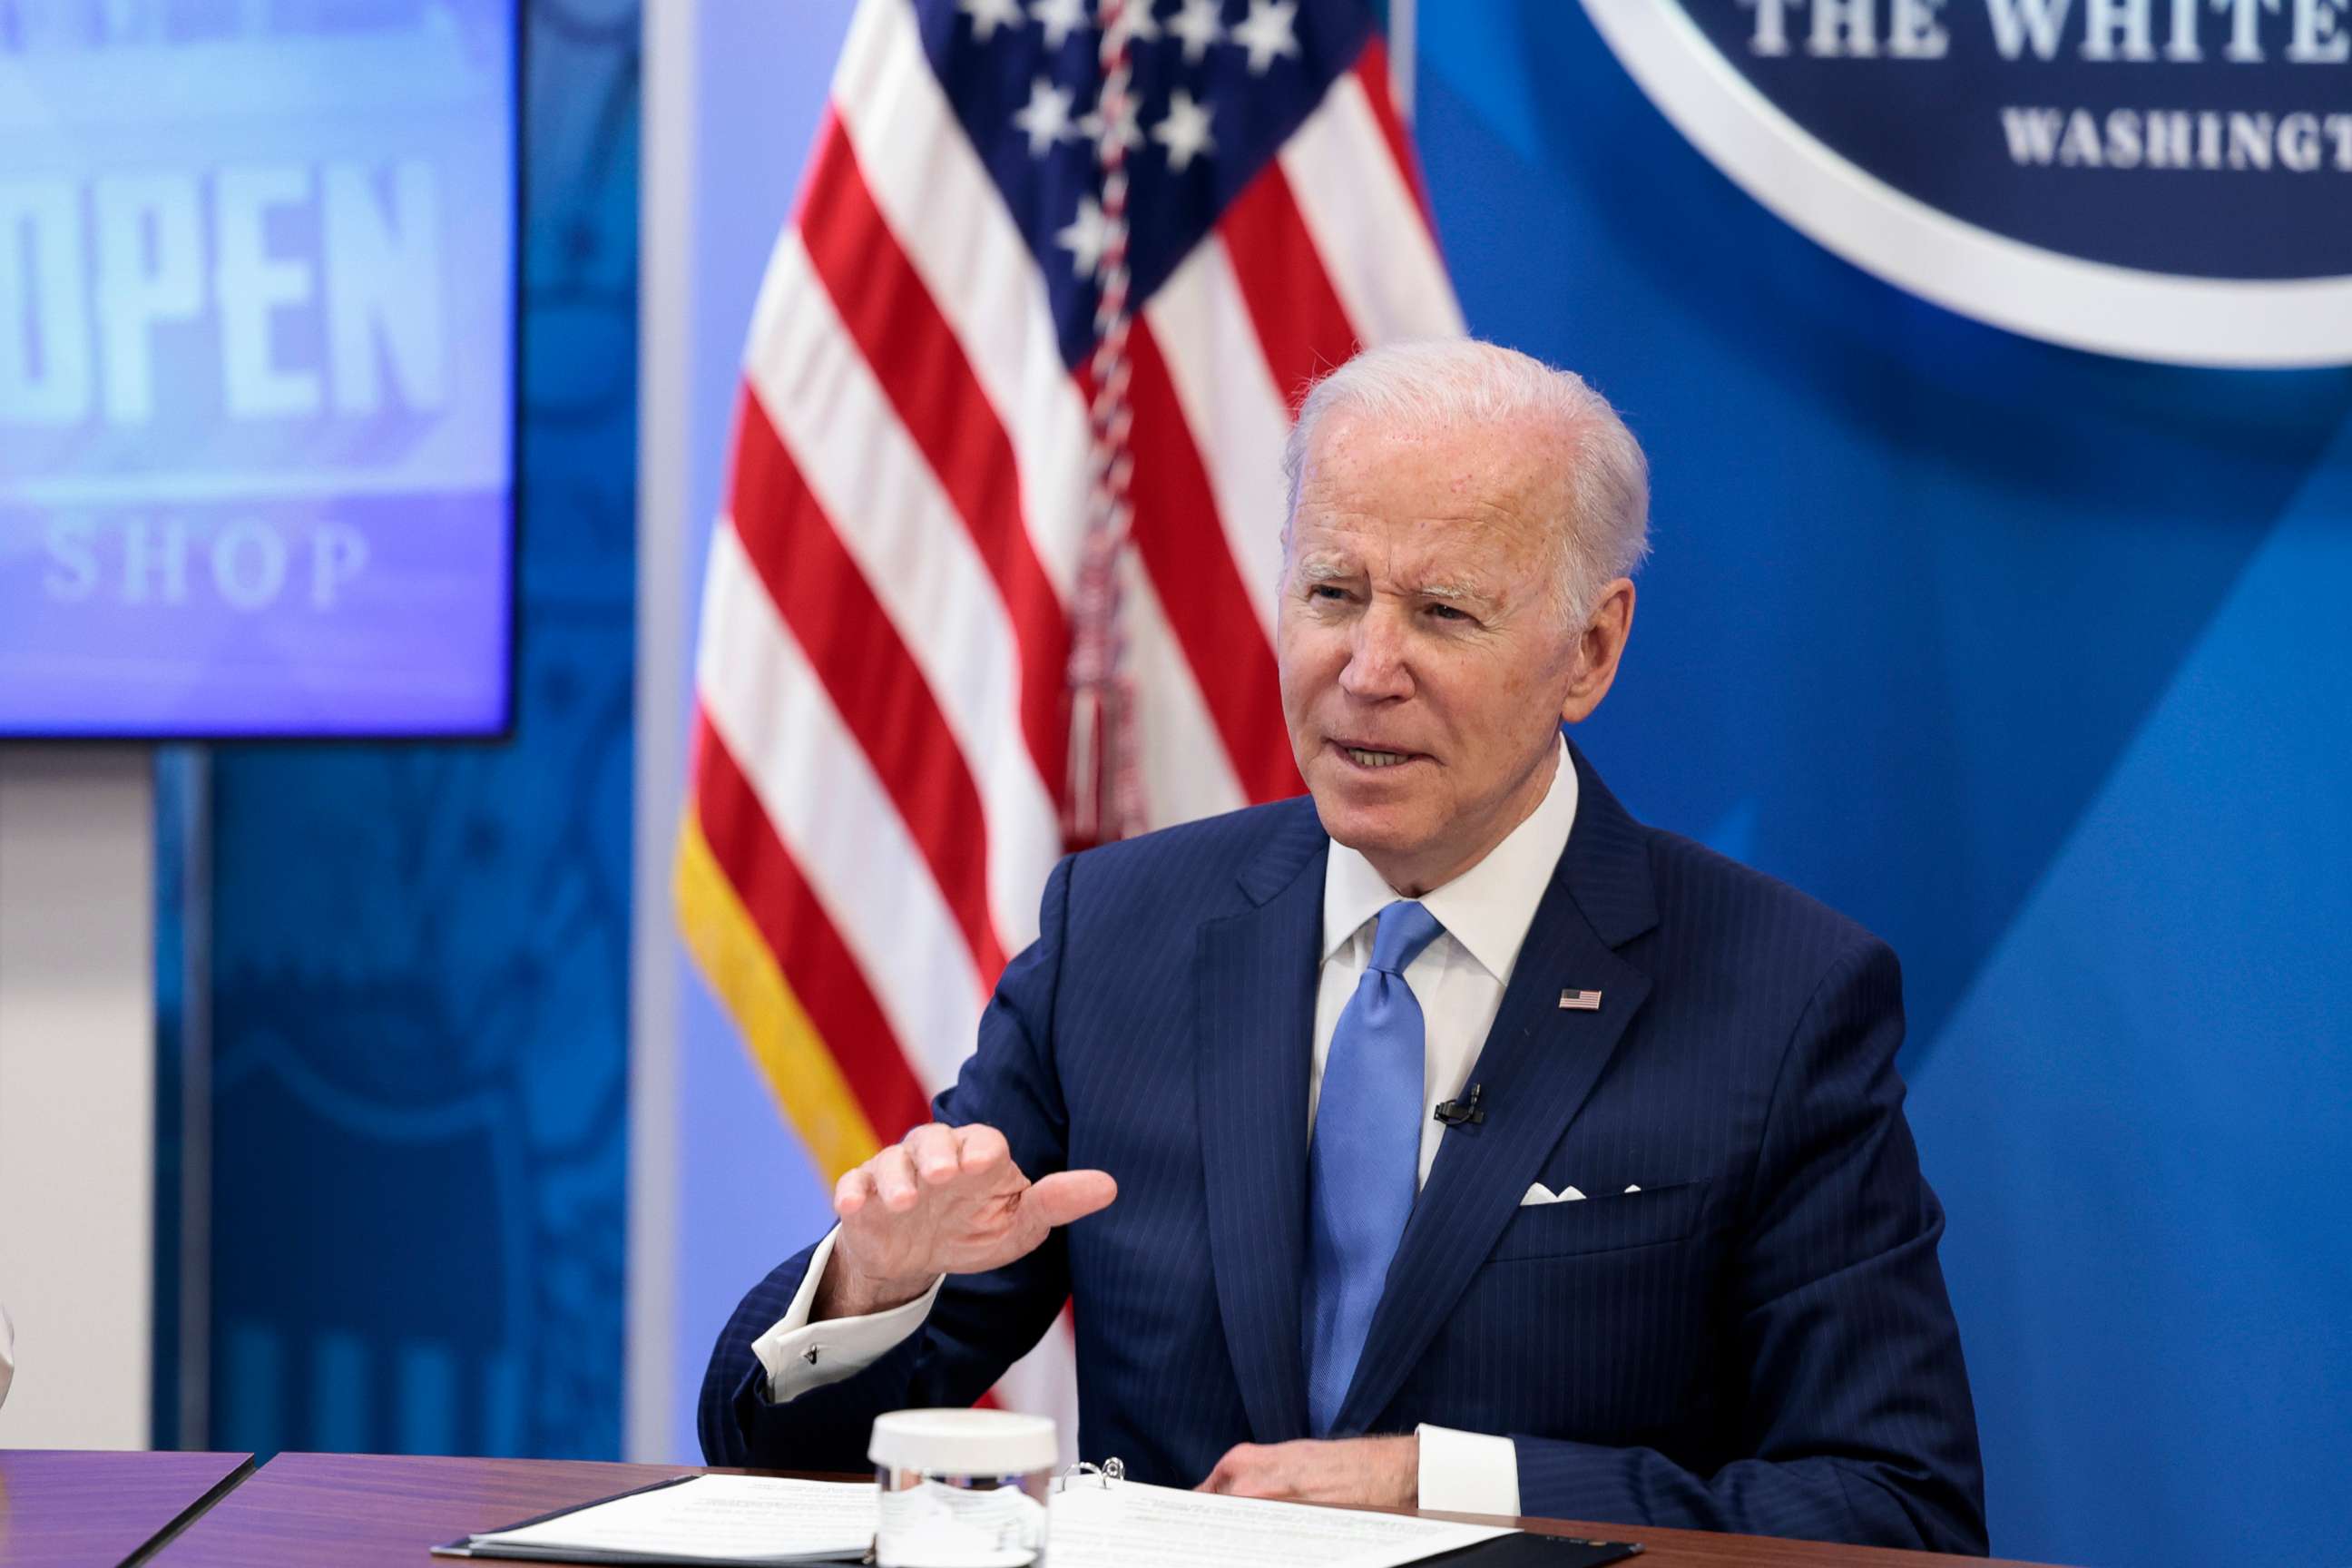 PHOTO: President Joe Biden gives remarks before a meeting at the White House on April 28, 2022, in Washington.